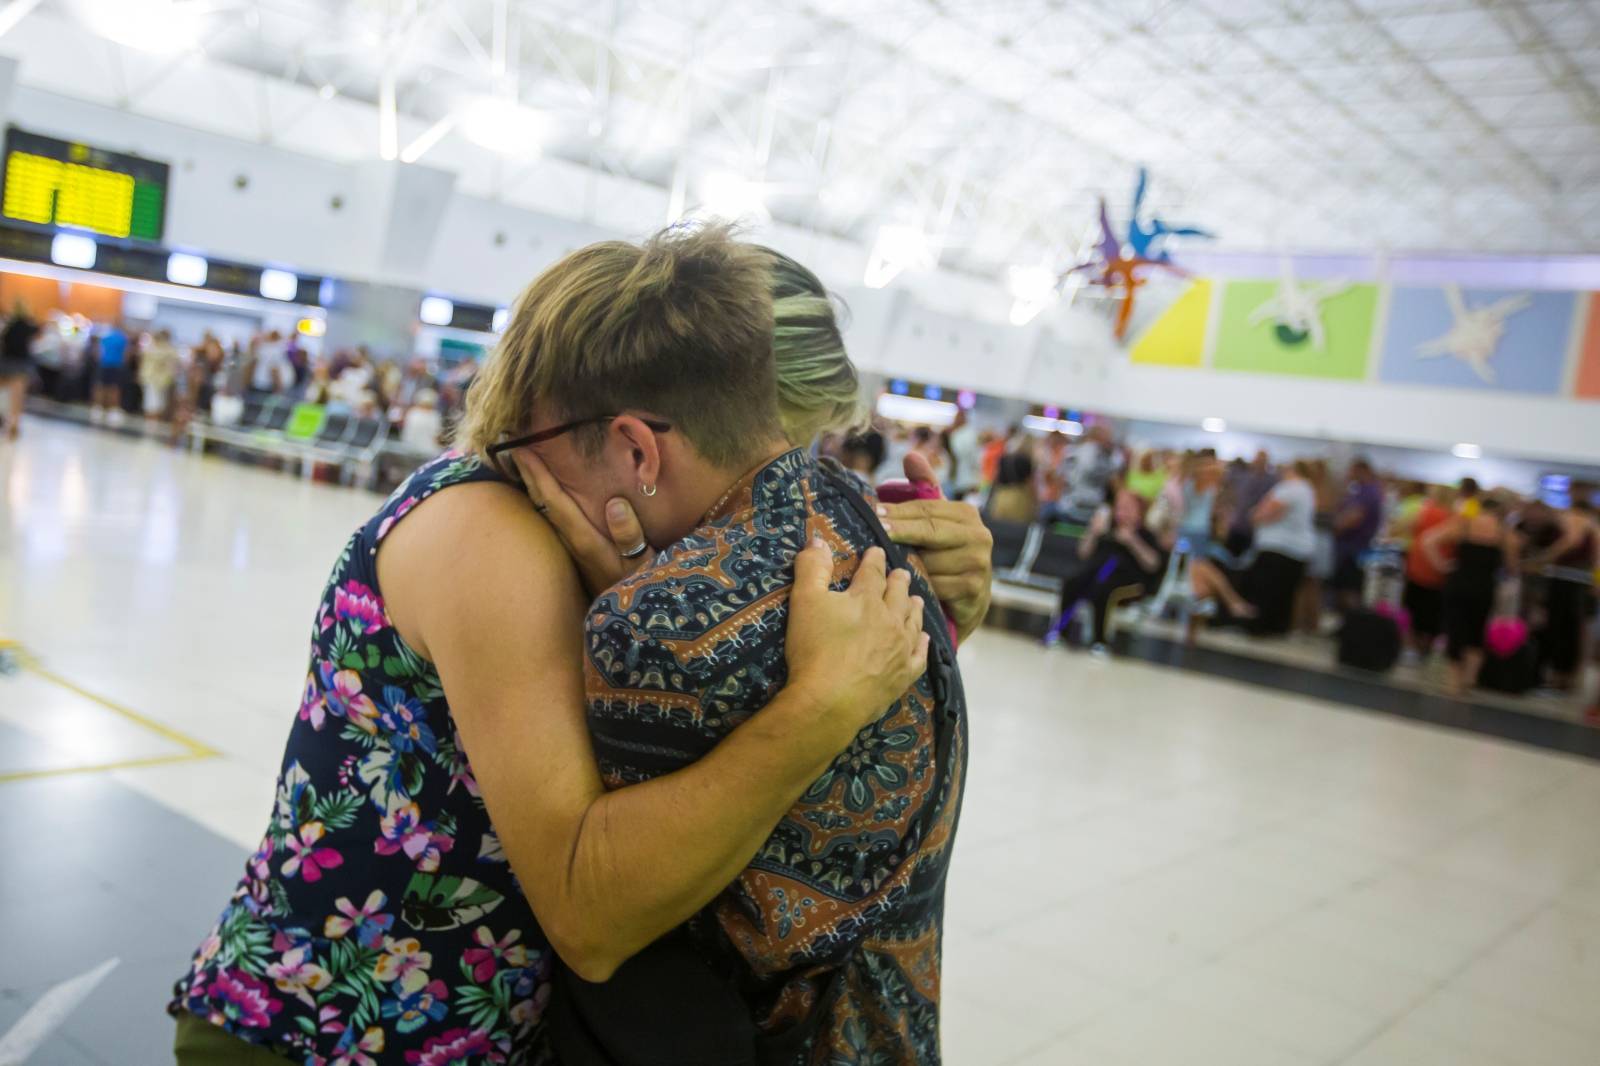 Thomas Cook passengers are seen at Las Palmas Airport after the world's oldest travel firm collapsed